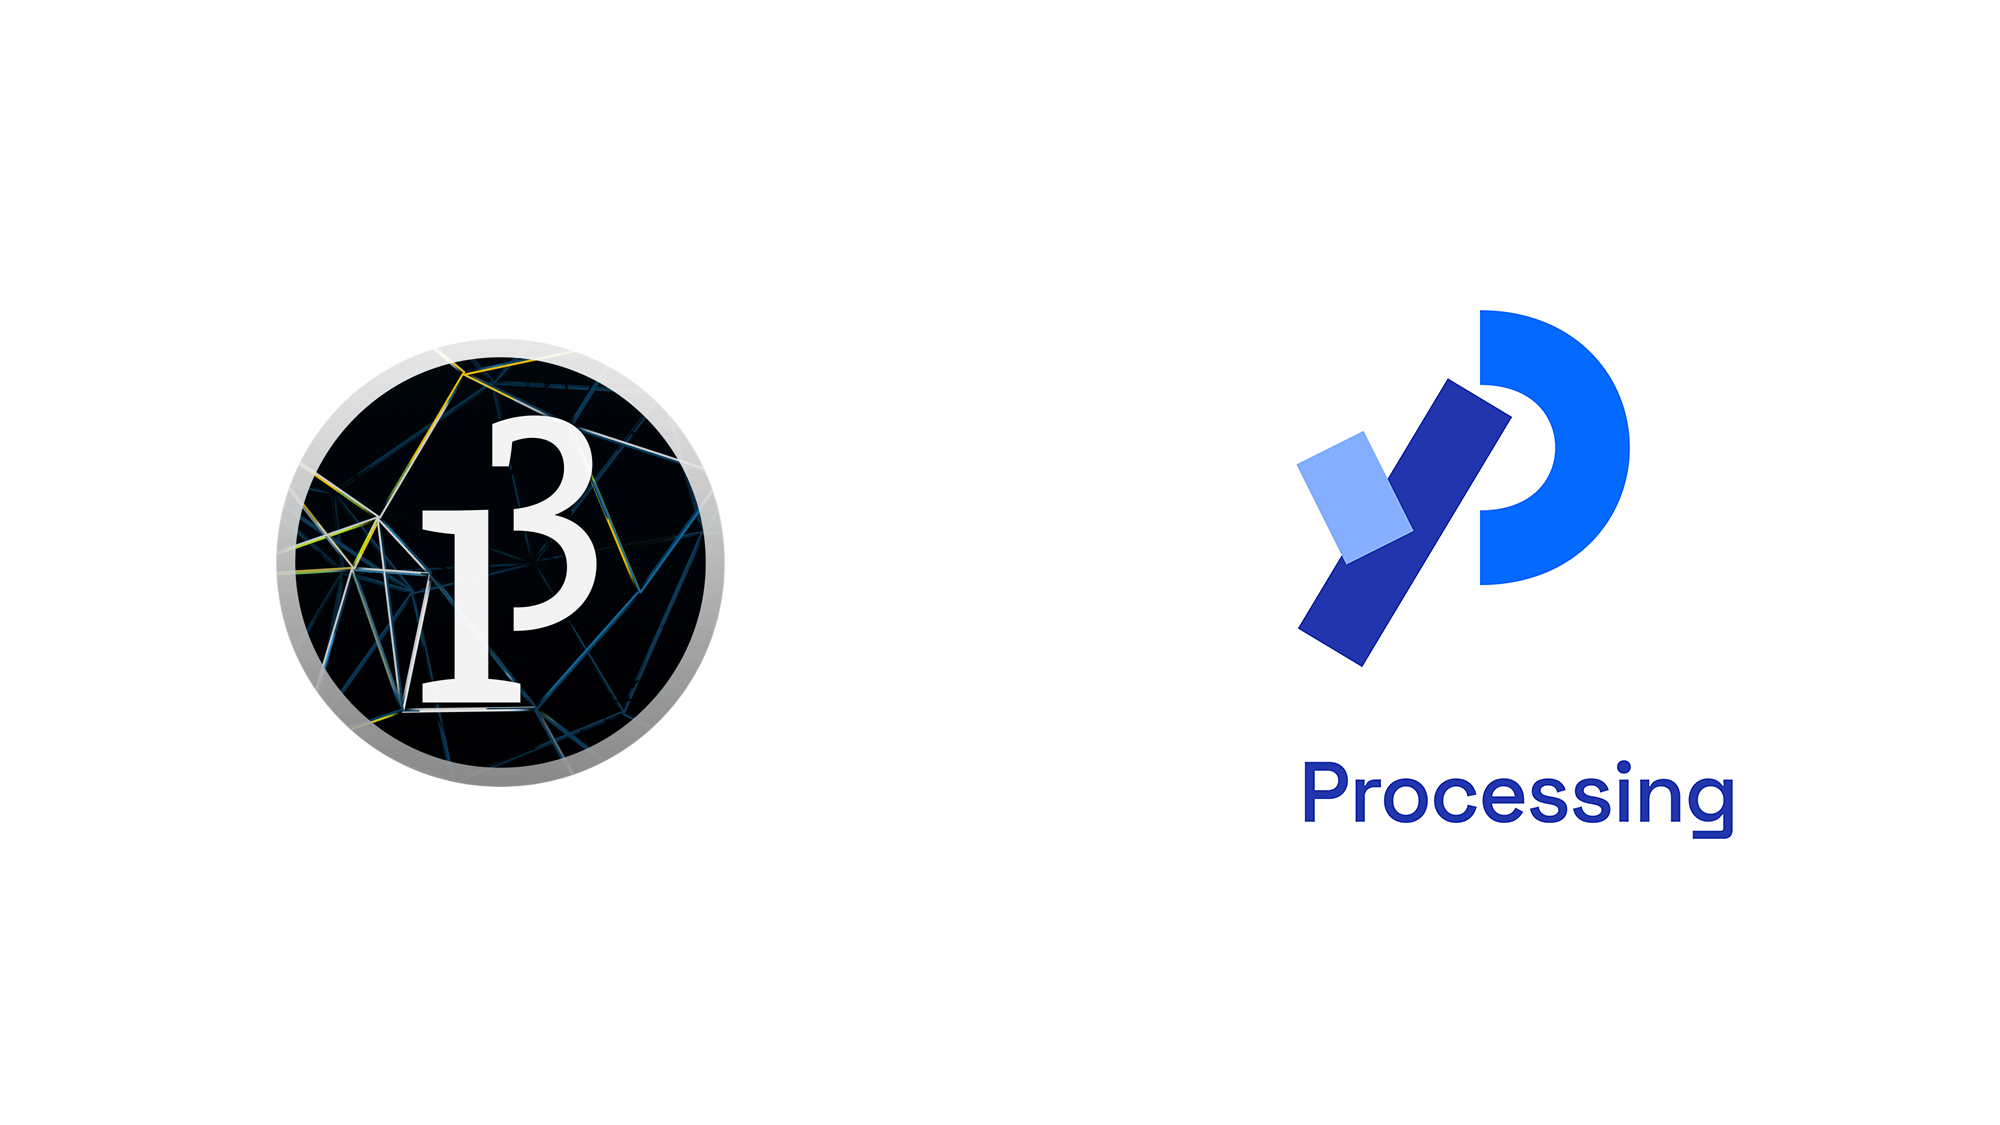 Brand New New Logo And Identity For Processing By Design Systems